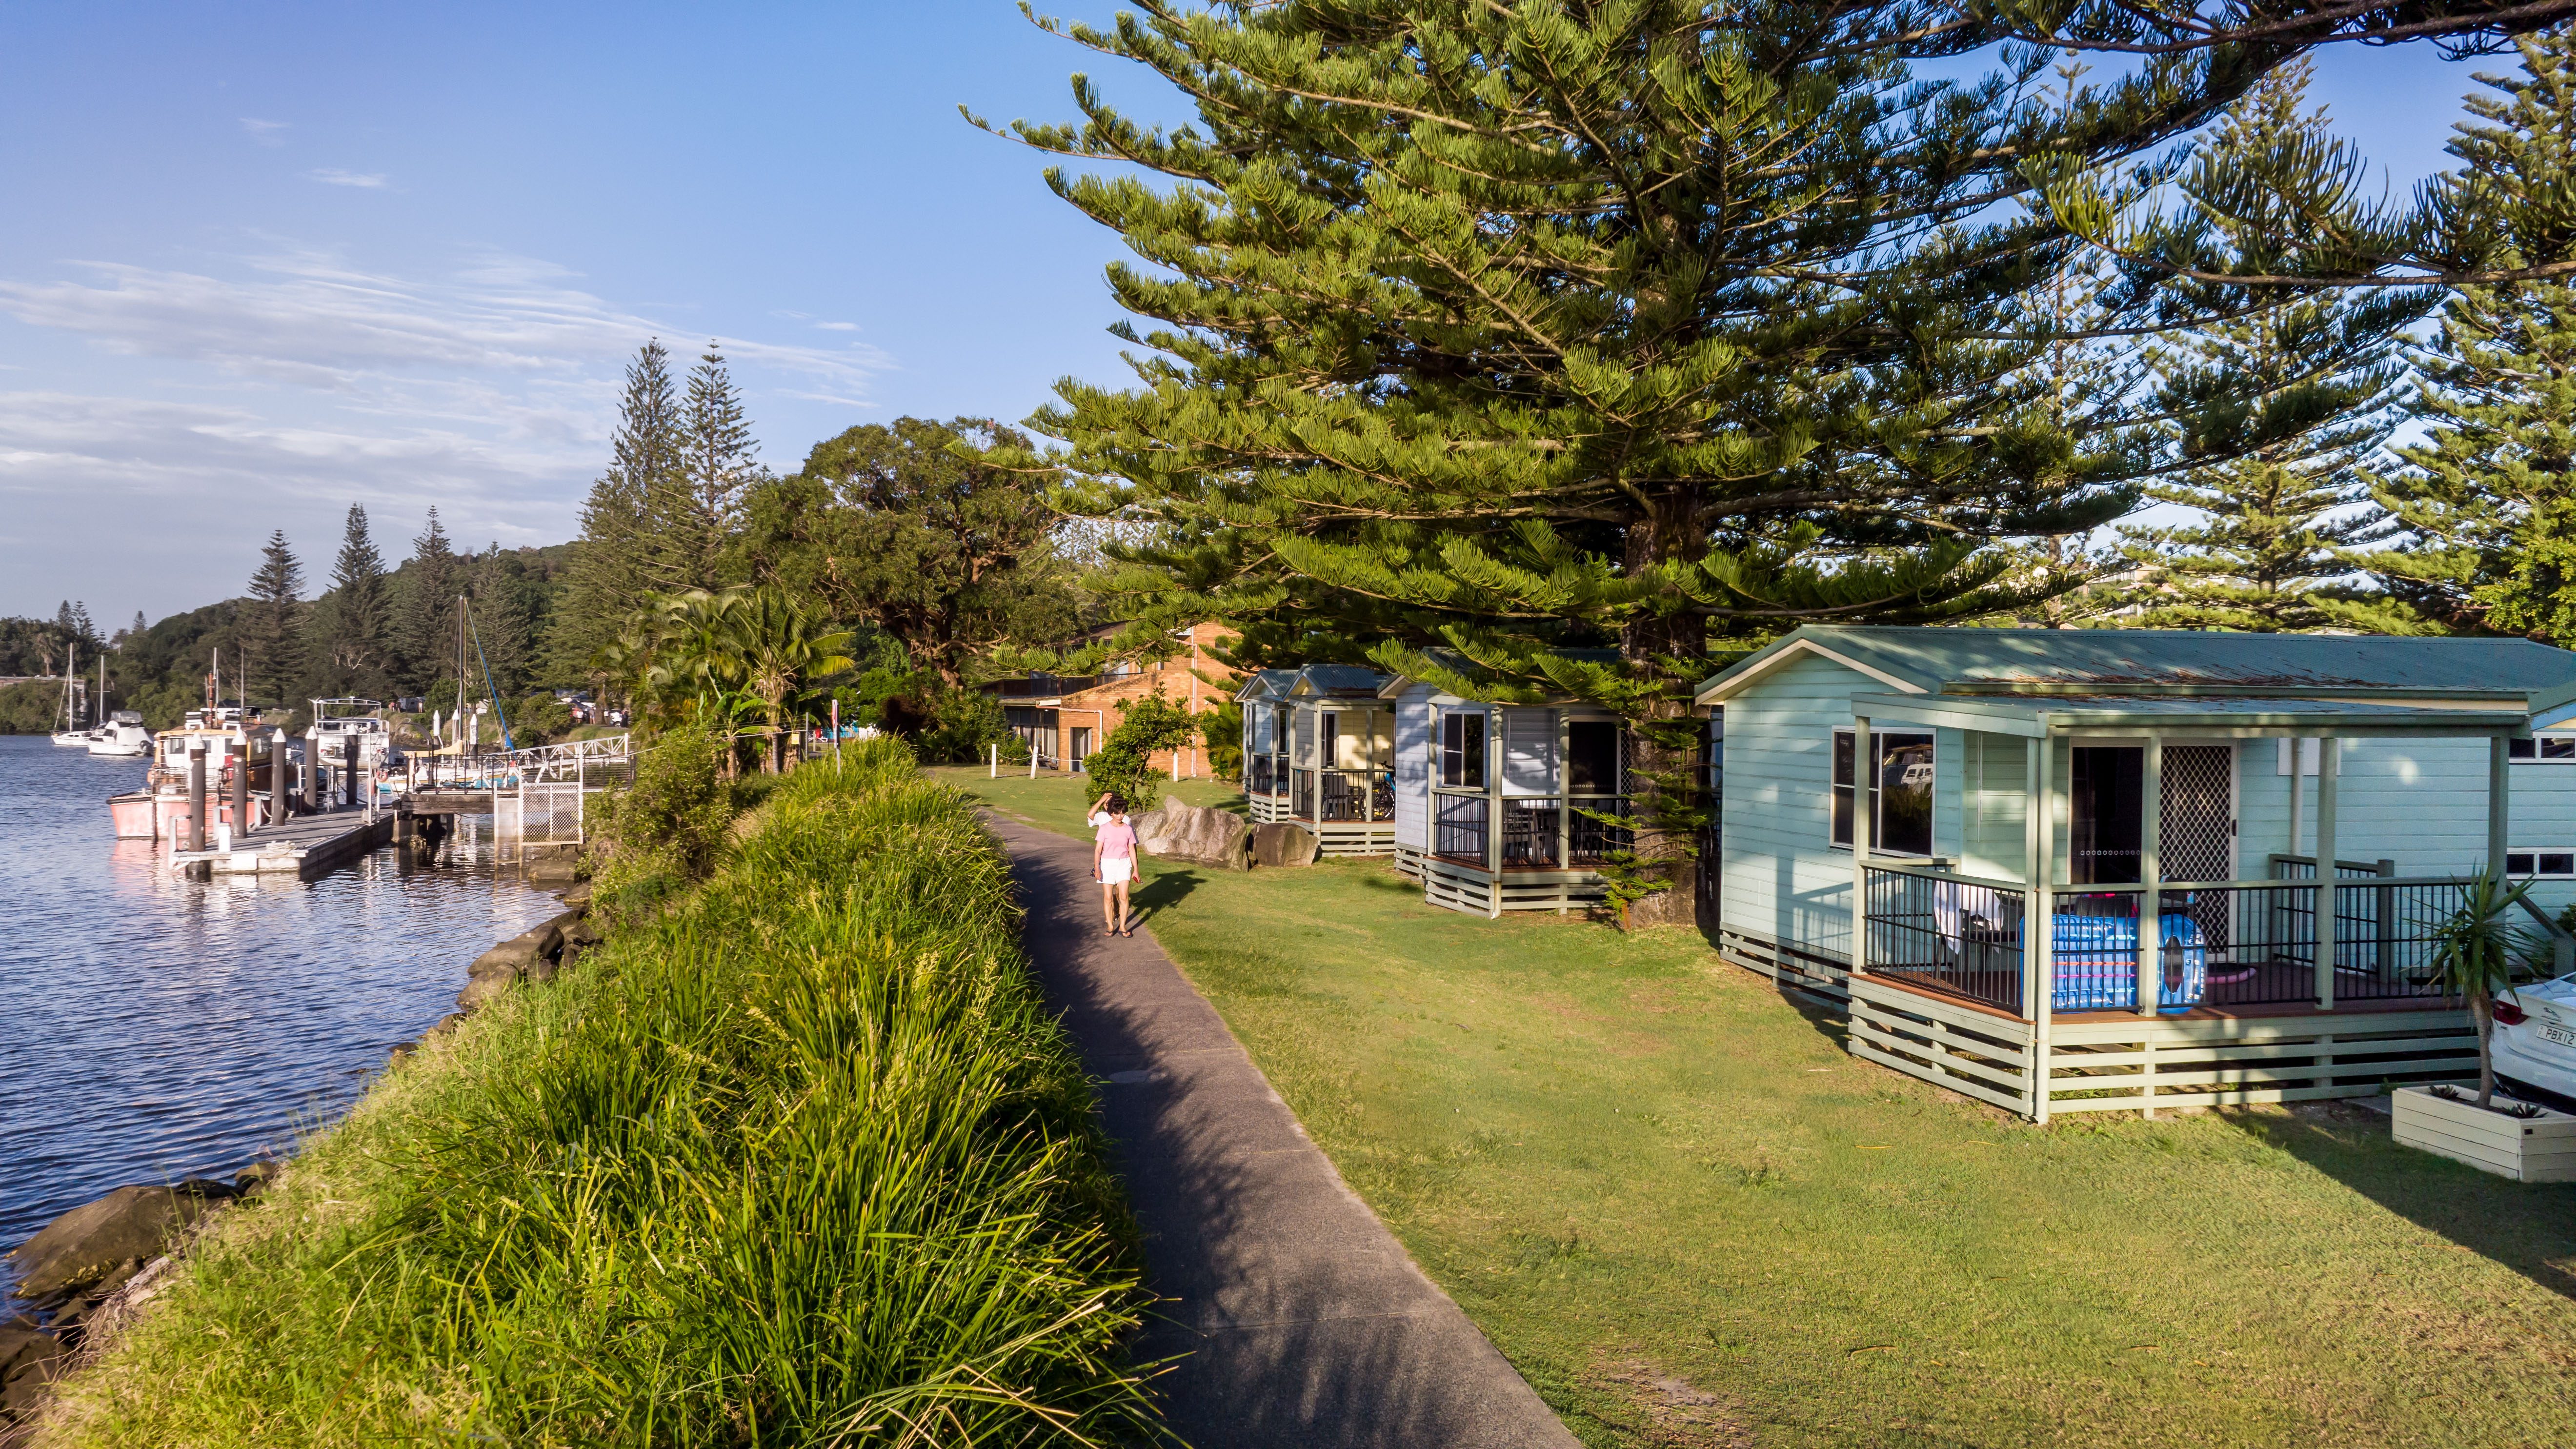 Camping Sites & Accommodation North Coast NSW